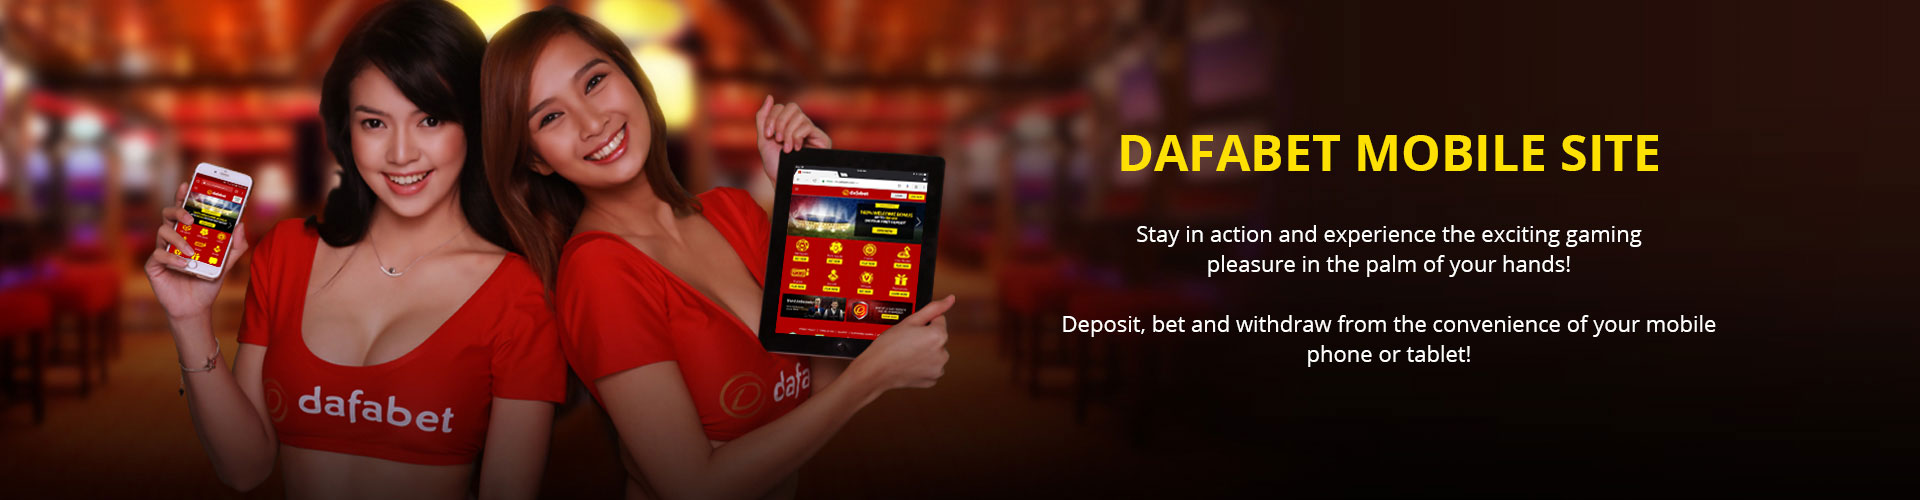 dafabet mobile betting sites